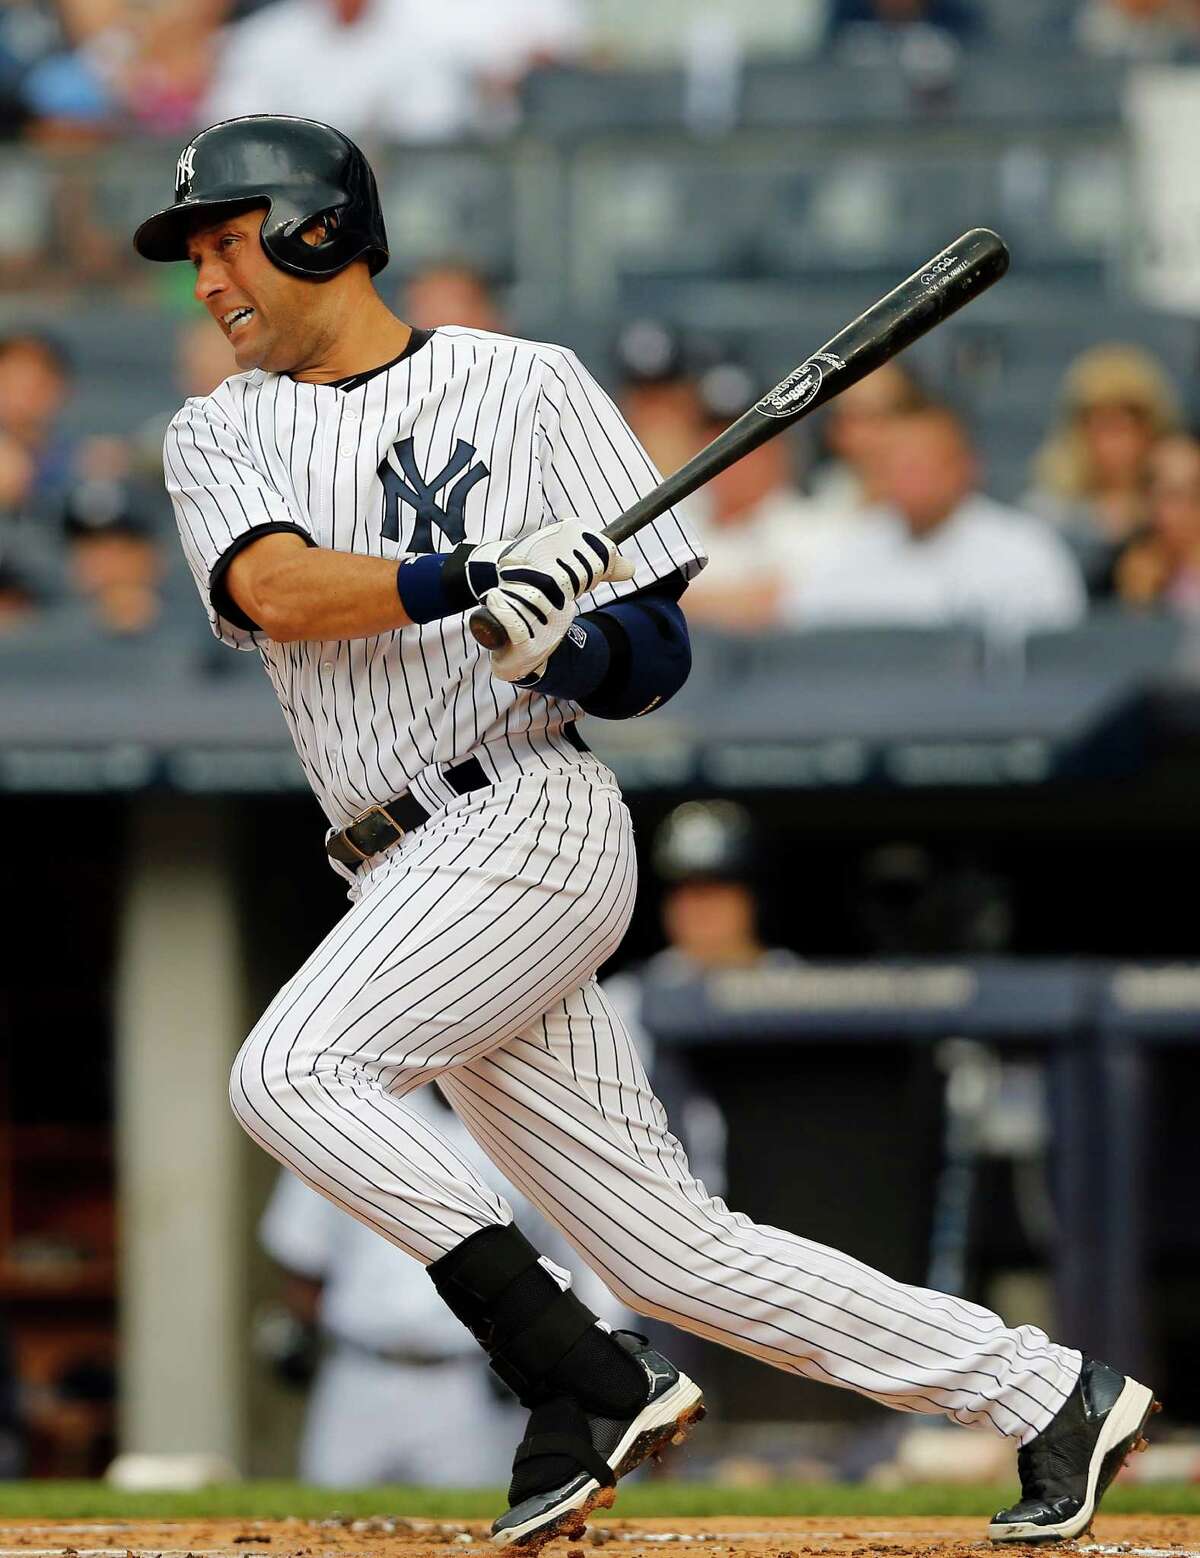 Pinstripes personified, Jeter to retire at season's end